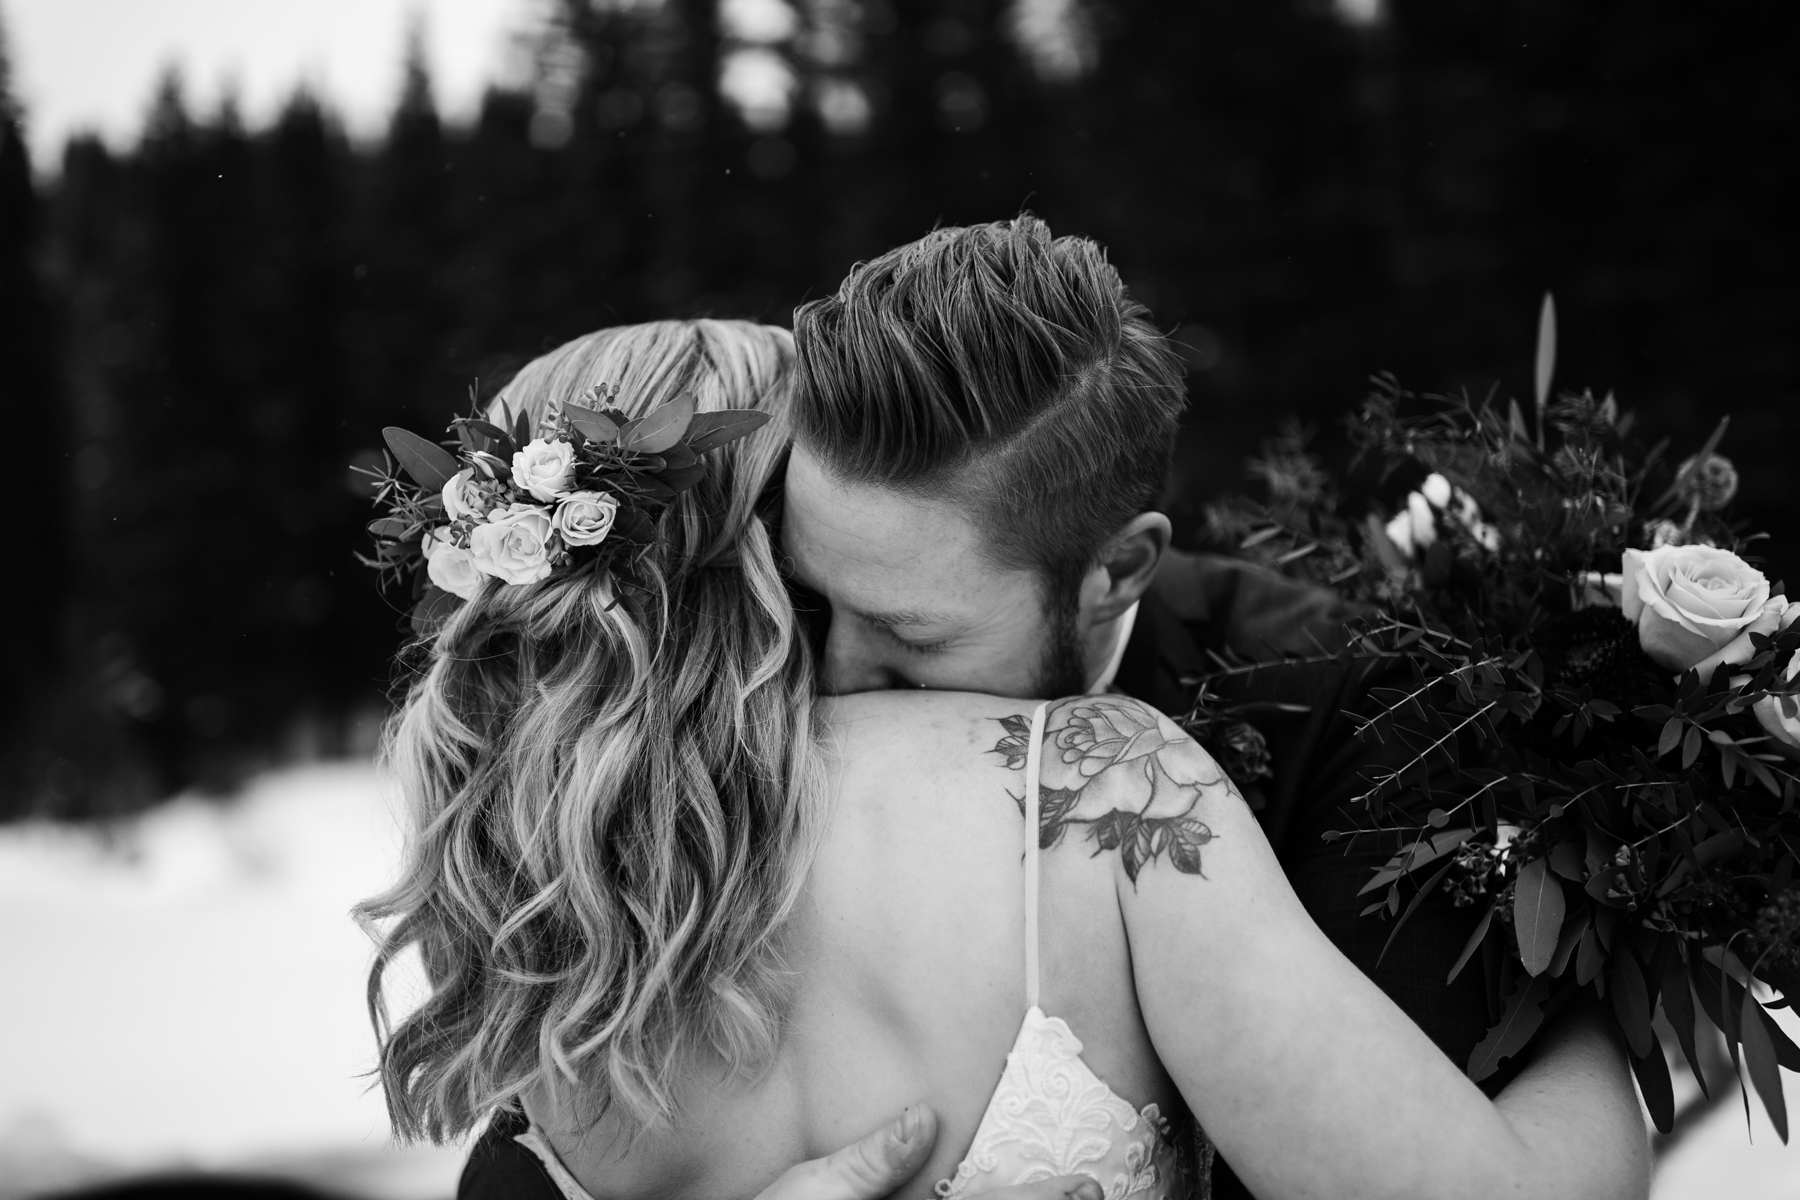 Canmore Elopement Photographer in the Canadian Rockies - Image 17